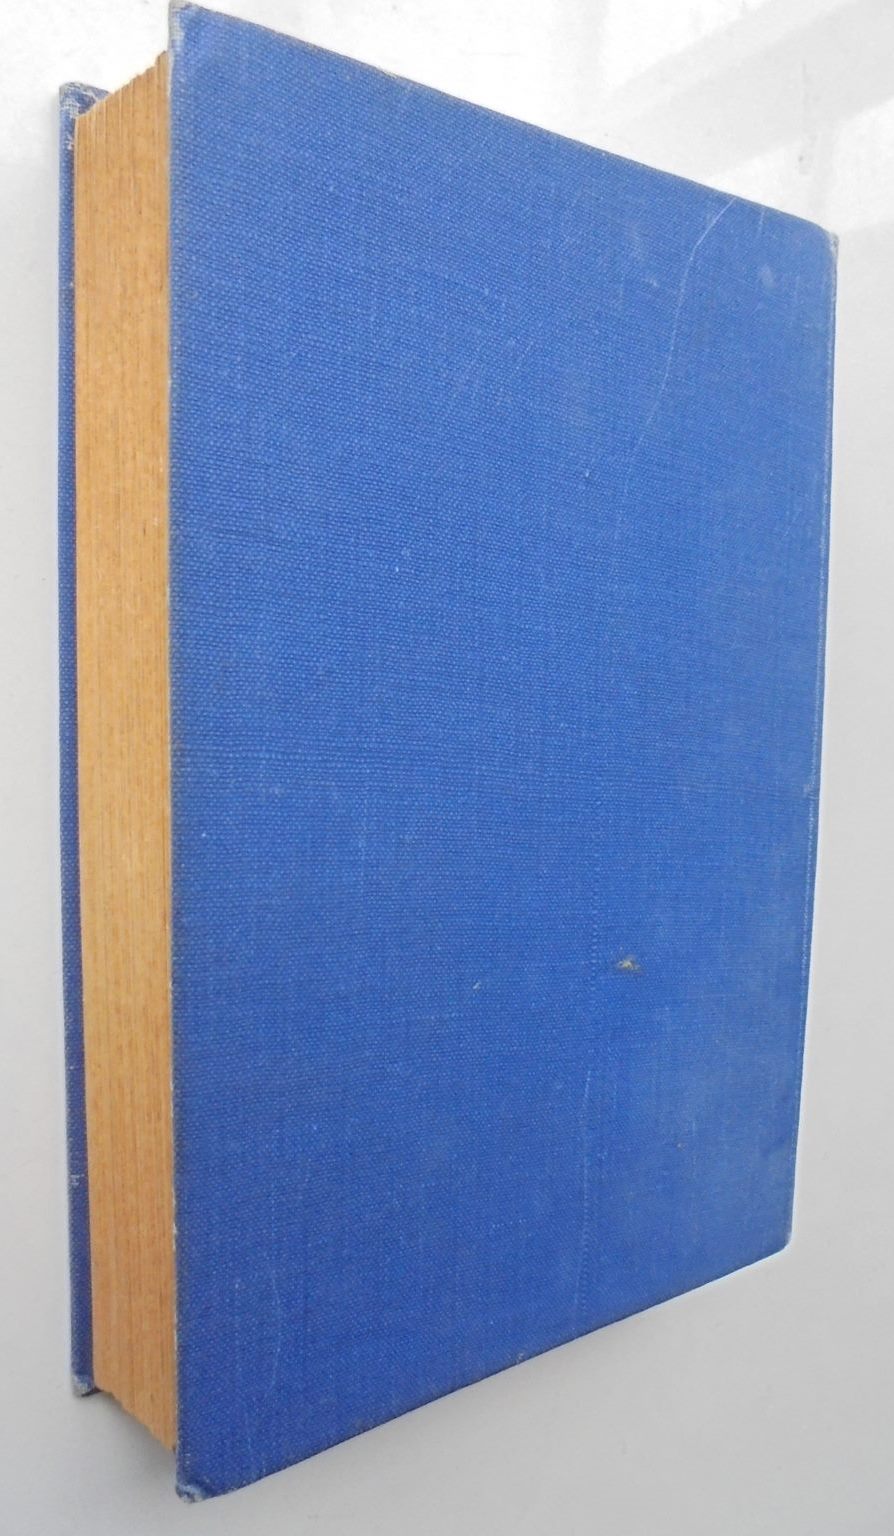 Merry Again by Clare Mallory.1st edition (1947)